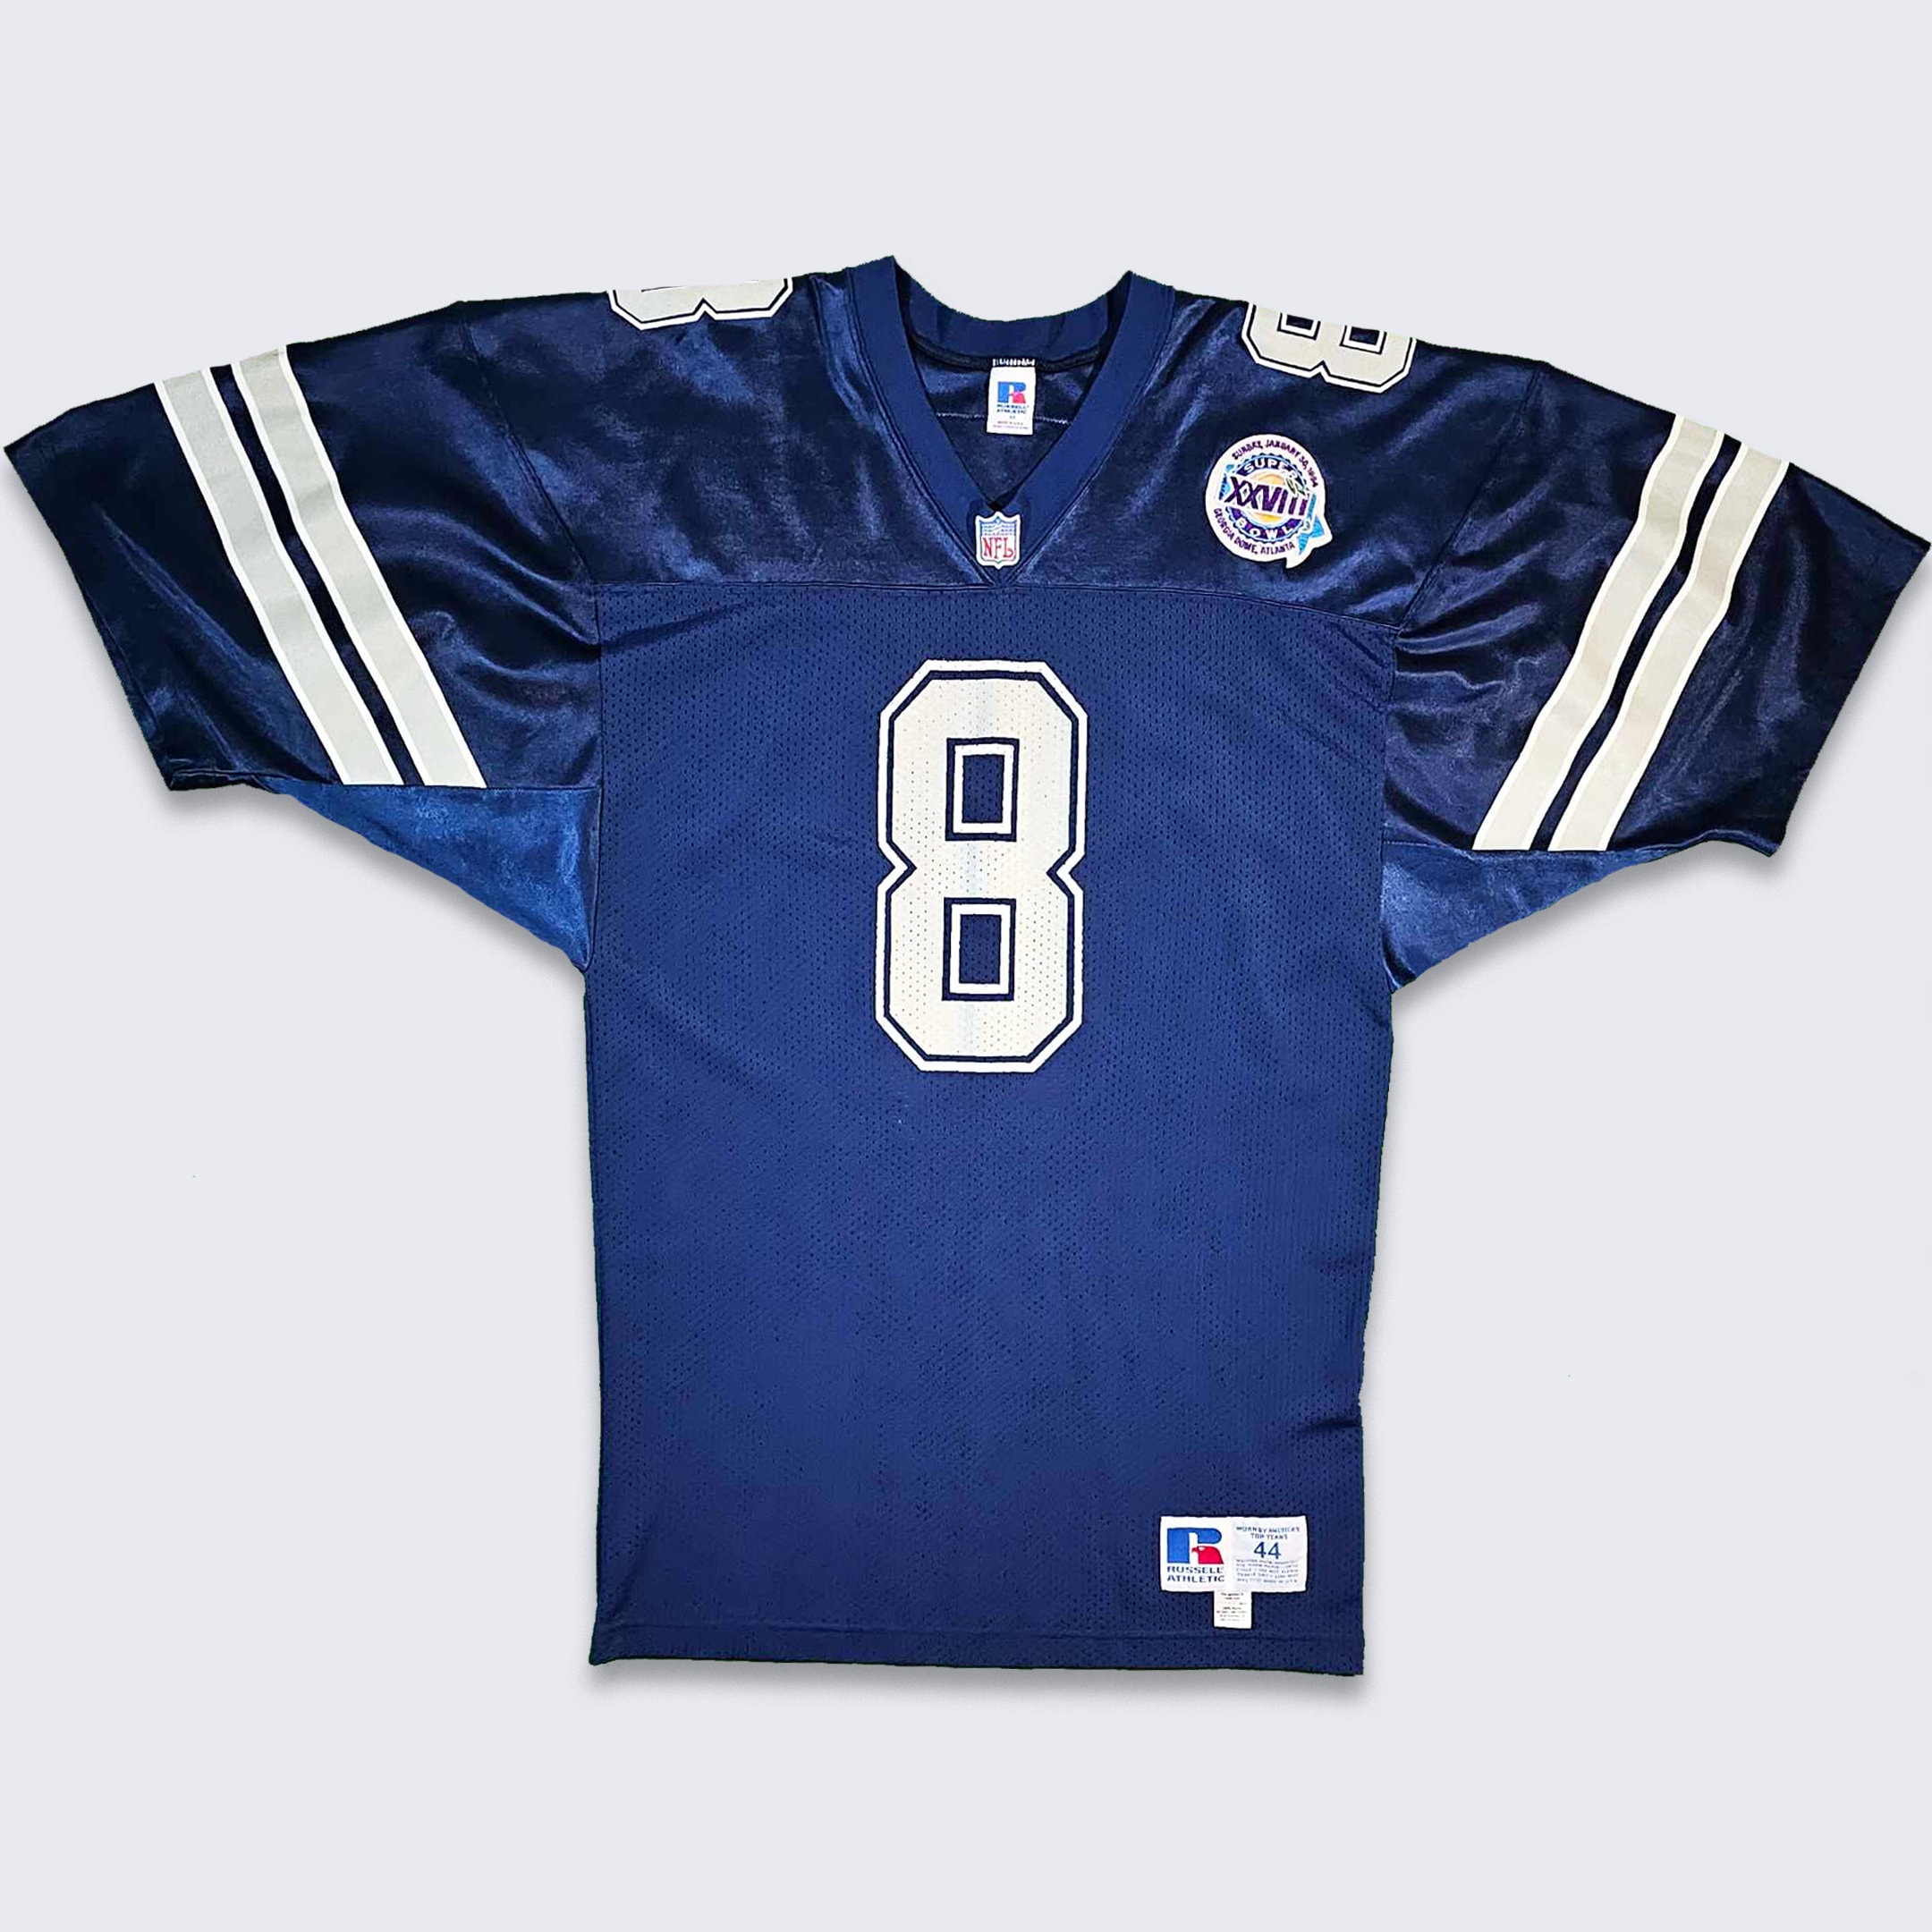 Dallas Cowboys Vintage 90s Troy Aikman Russell Football Jersey - Stitched -  NFL Football Blue Uniform Shirt - Size Men's Large FREE Shipping